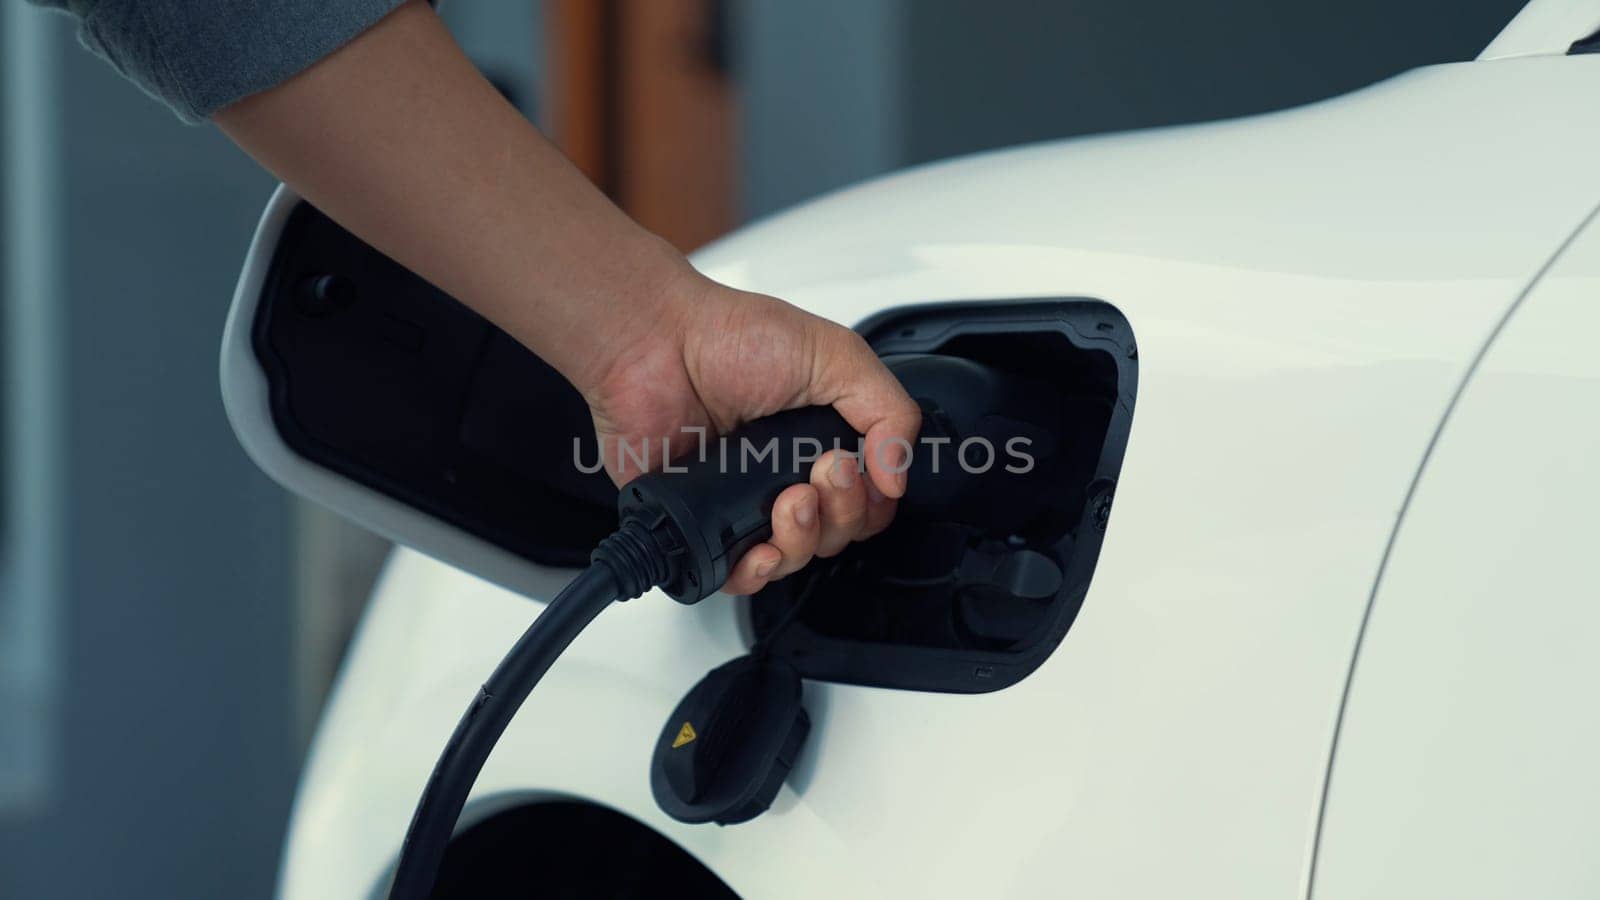 Progressive man attaches an emission-free power connector to the battery of electric vehicle at his home. Electric vehicle charging via cable from charging station to EV car battery